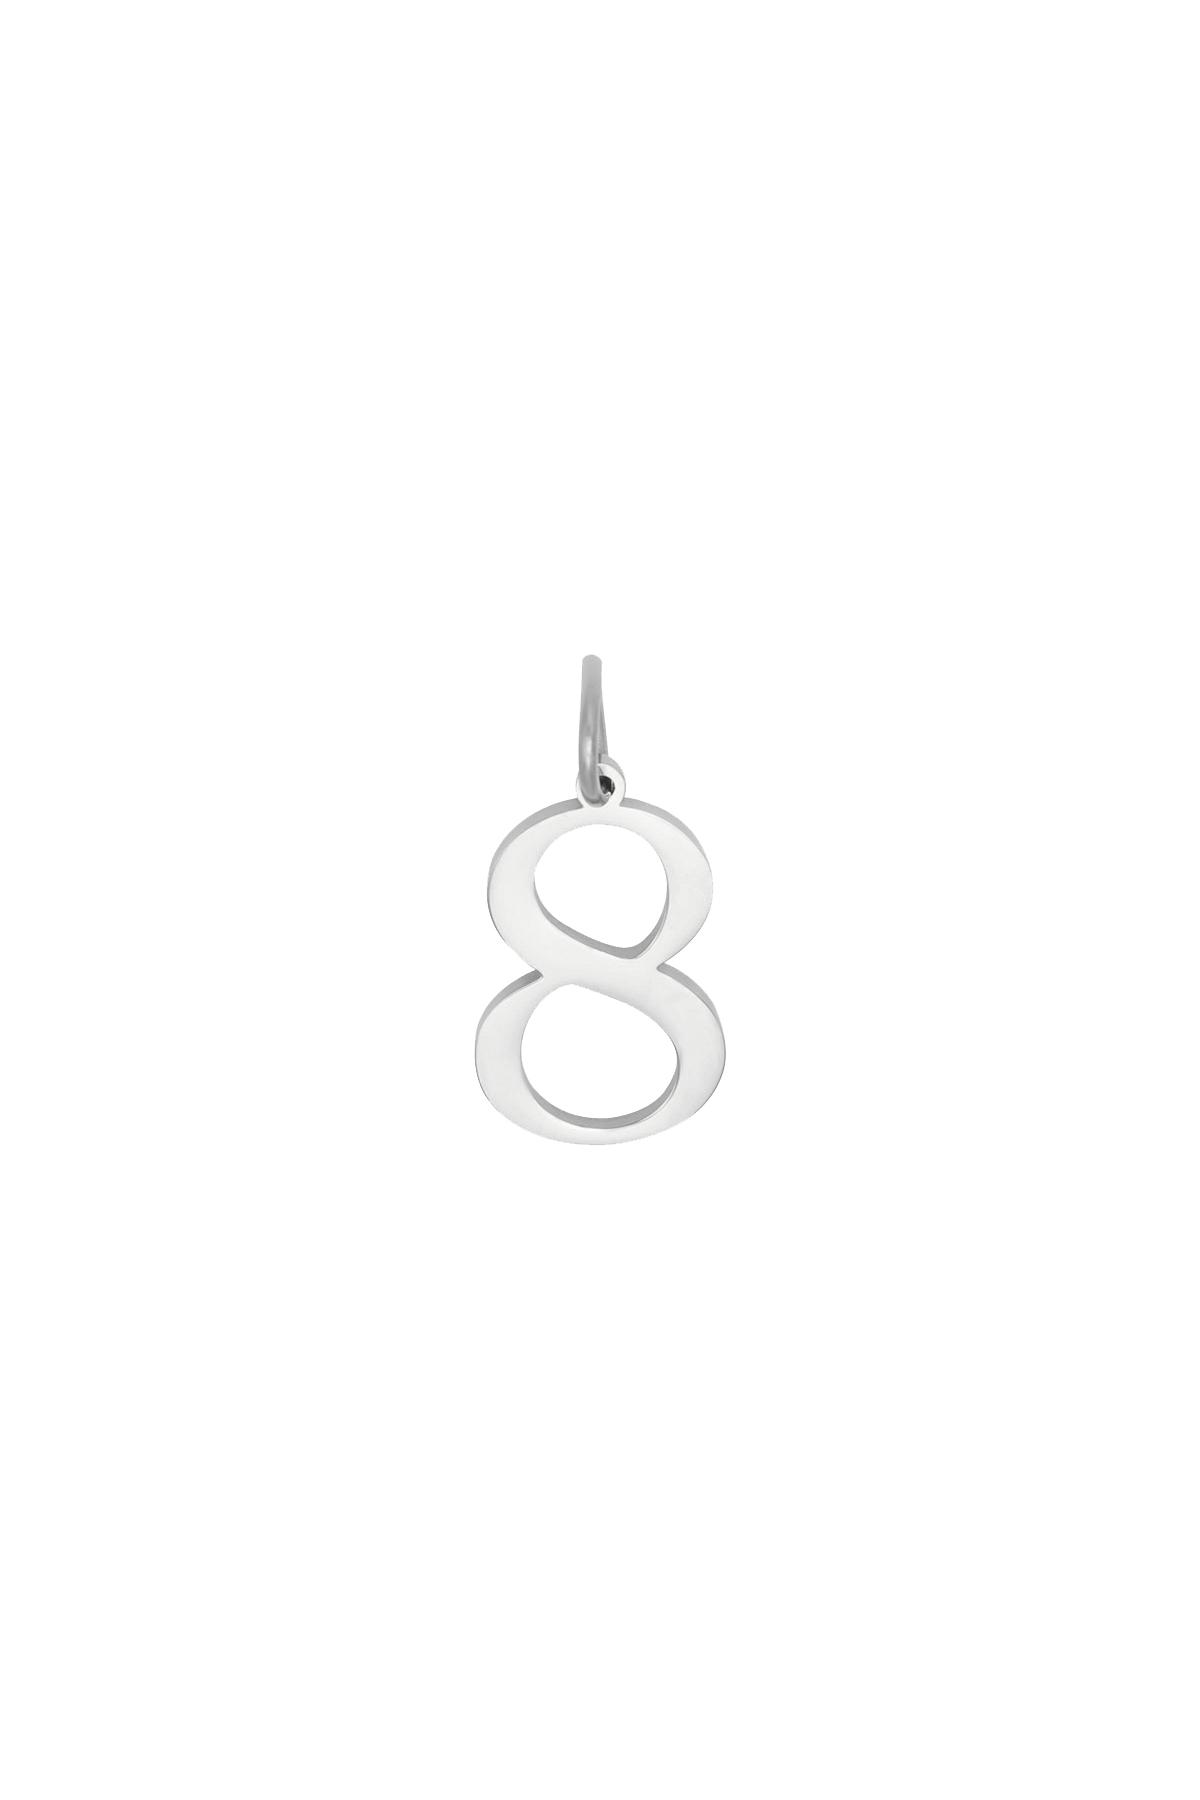 Silver / DIY Charm Digits Silver - 8 Stainless Steel Picture6